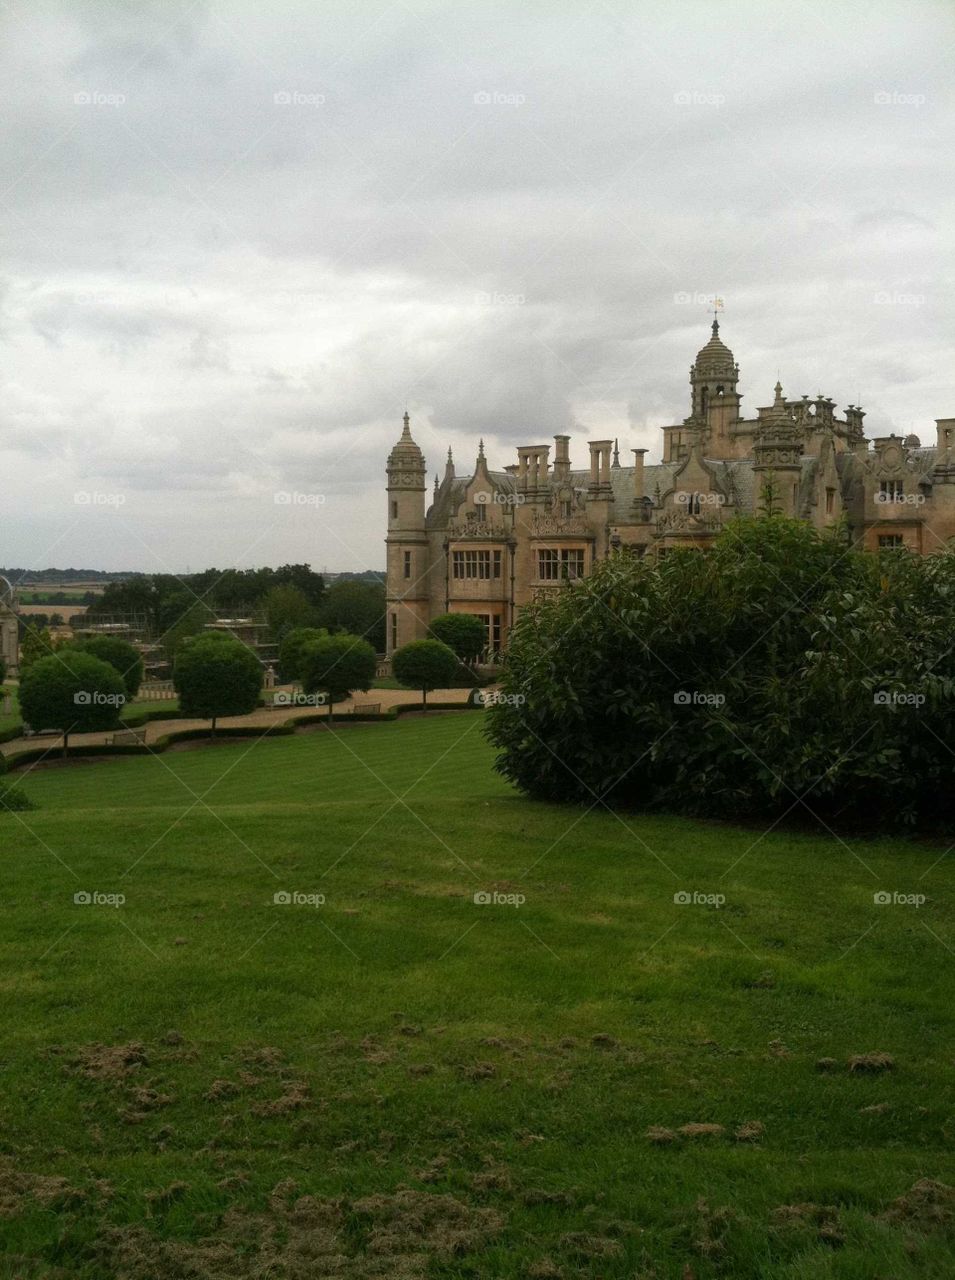 The manor on a cloudy day